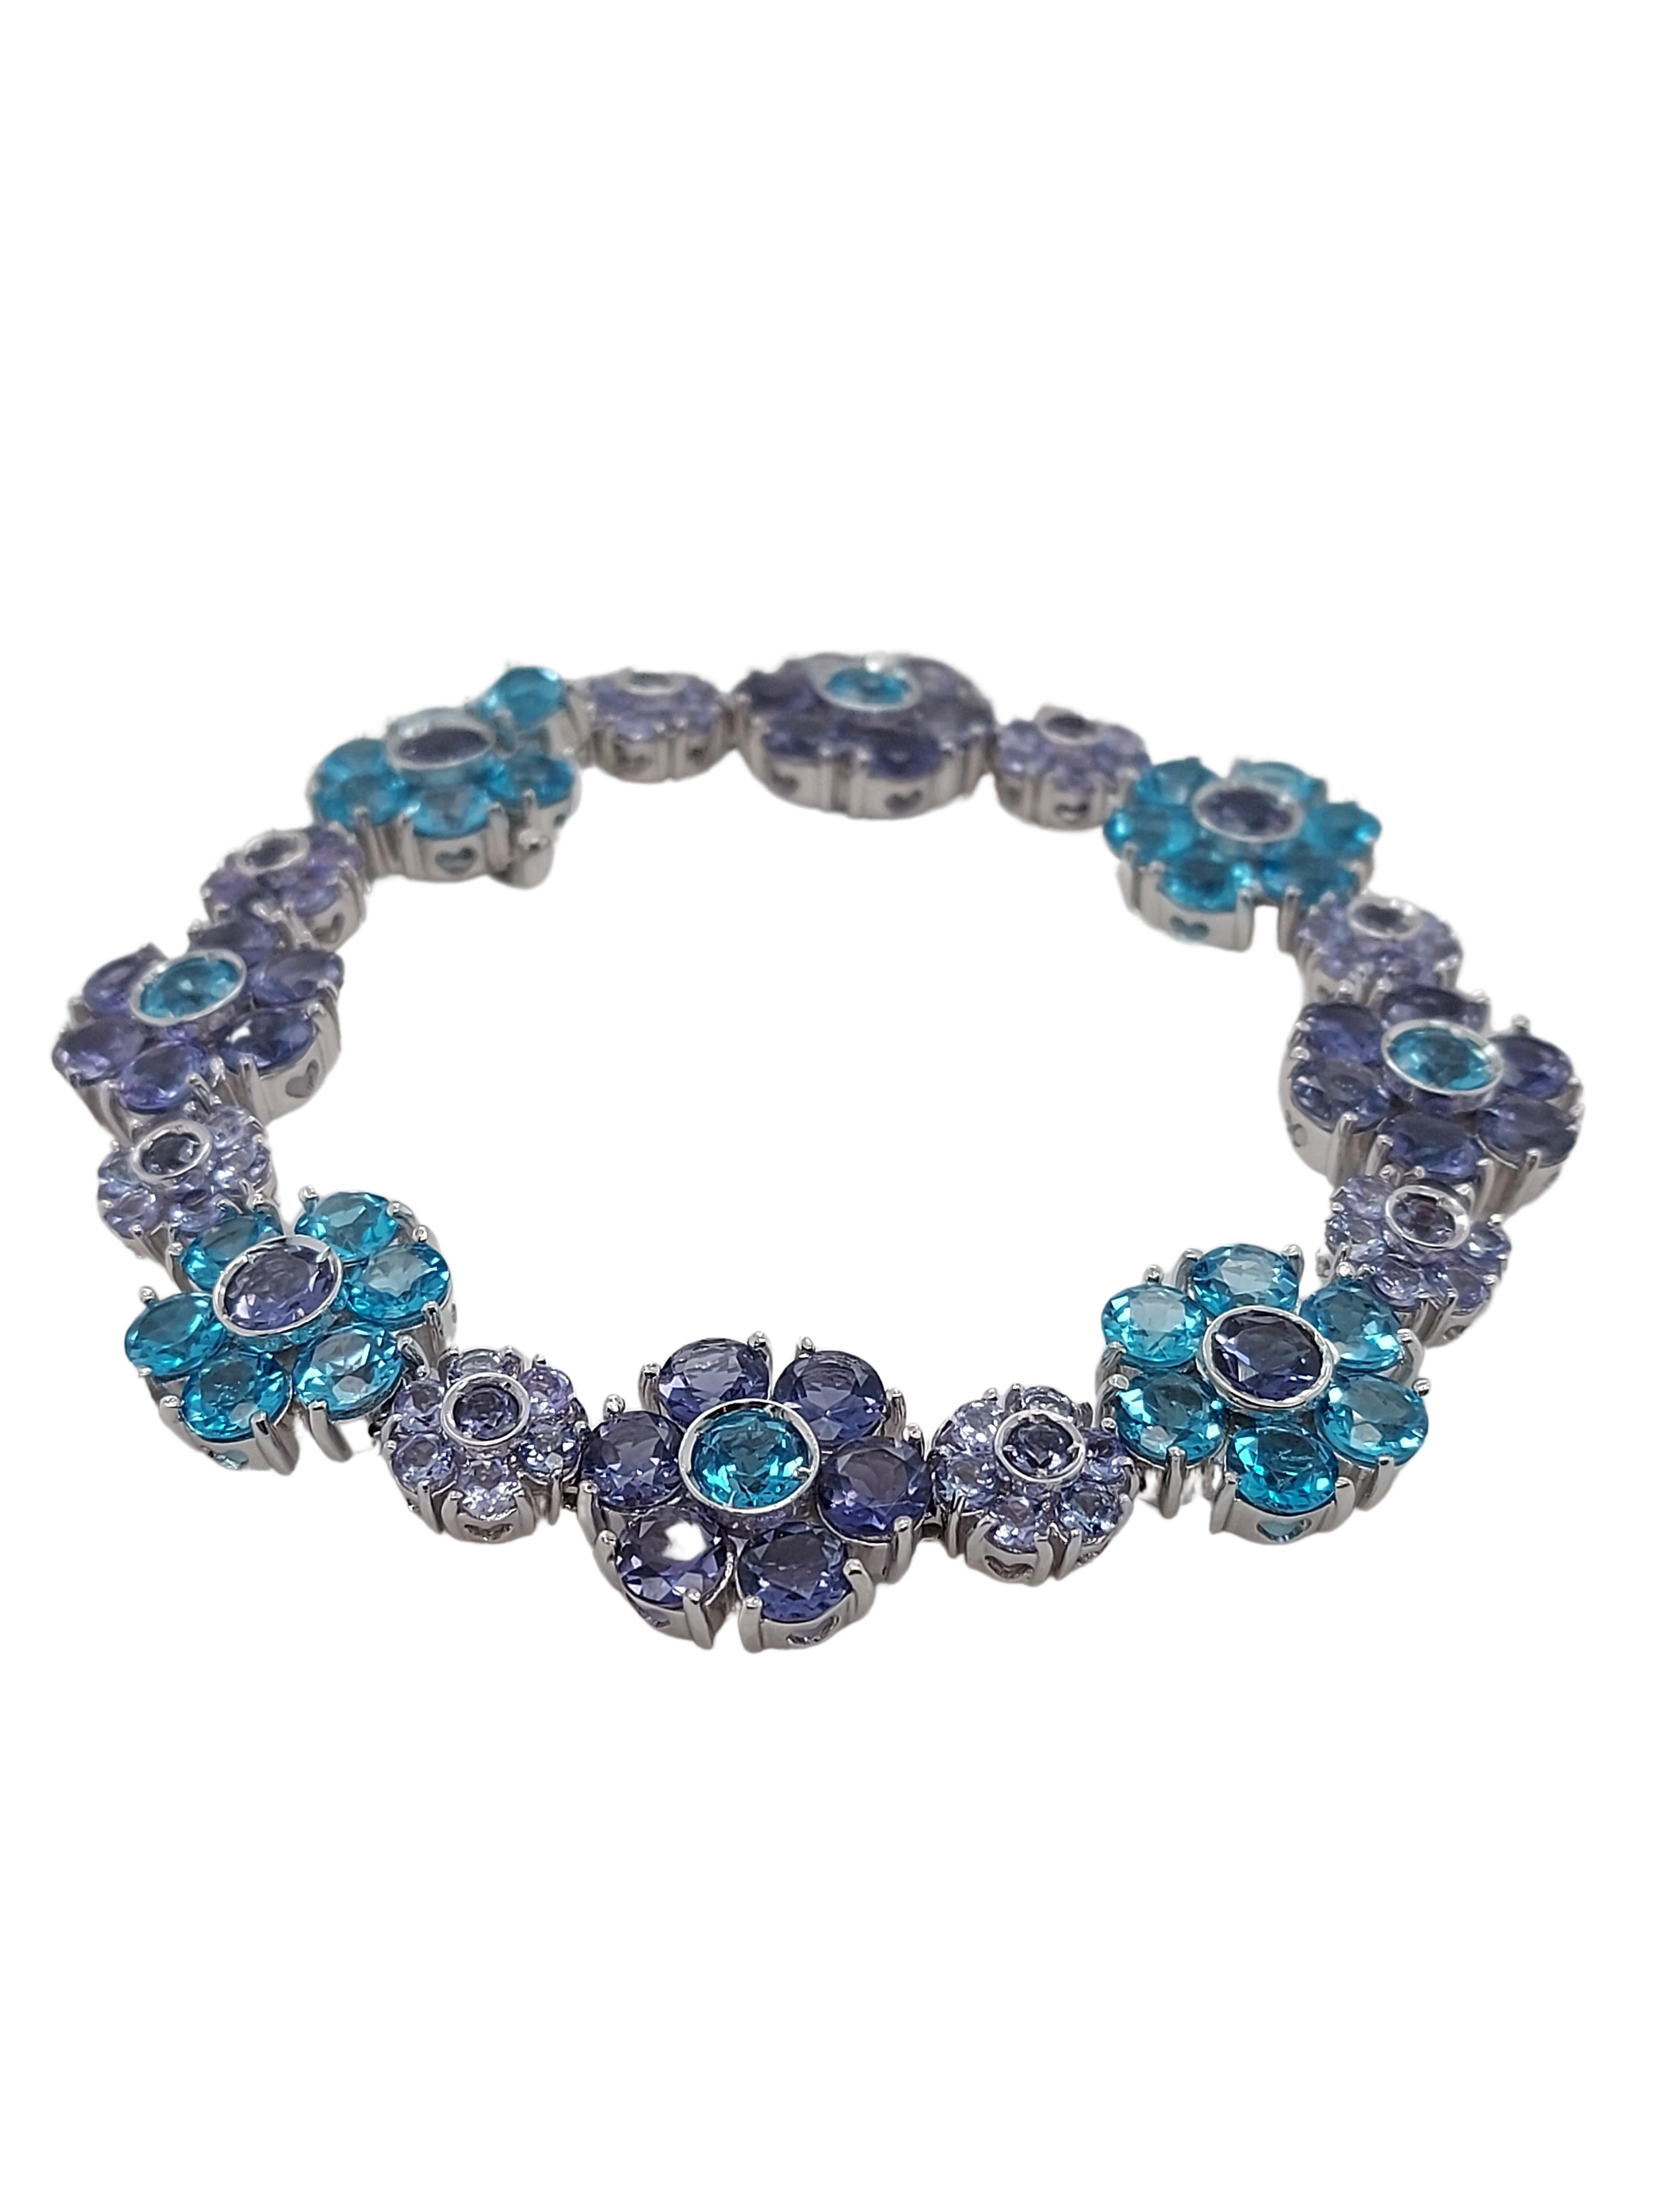 White Golden Bracelet With Semi Precious Stones By Pasquale Bruni 

Semi-Precious stones: Ca. 15.03 Ct. Topaz

Material: 18kt white gold

Measurements: 19 cm lang

Total weight: 34.7 grams / 1.225 oz / 22.3 dwt